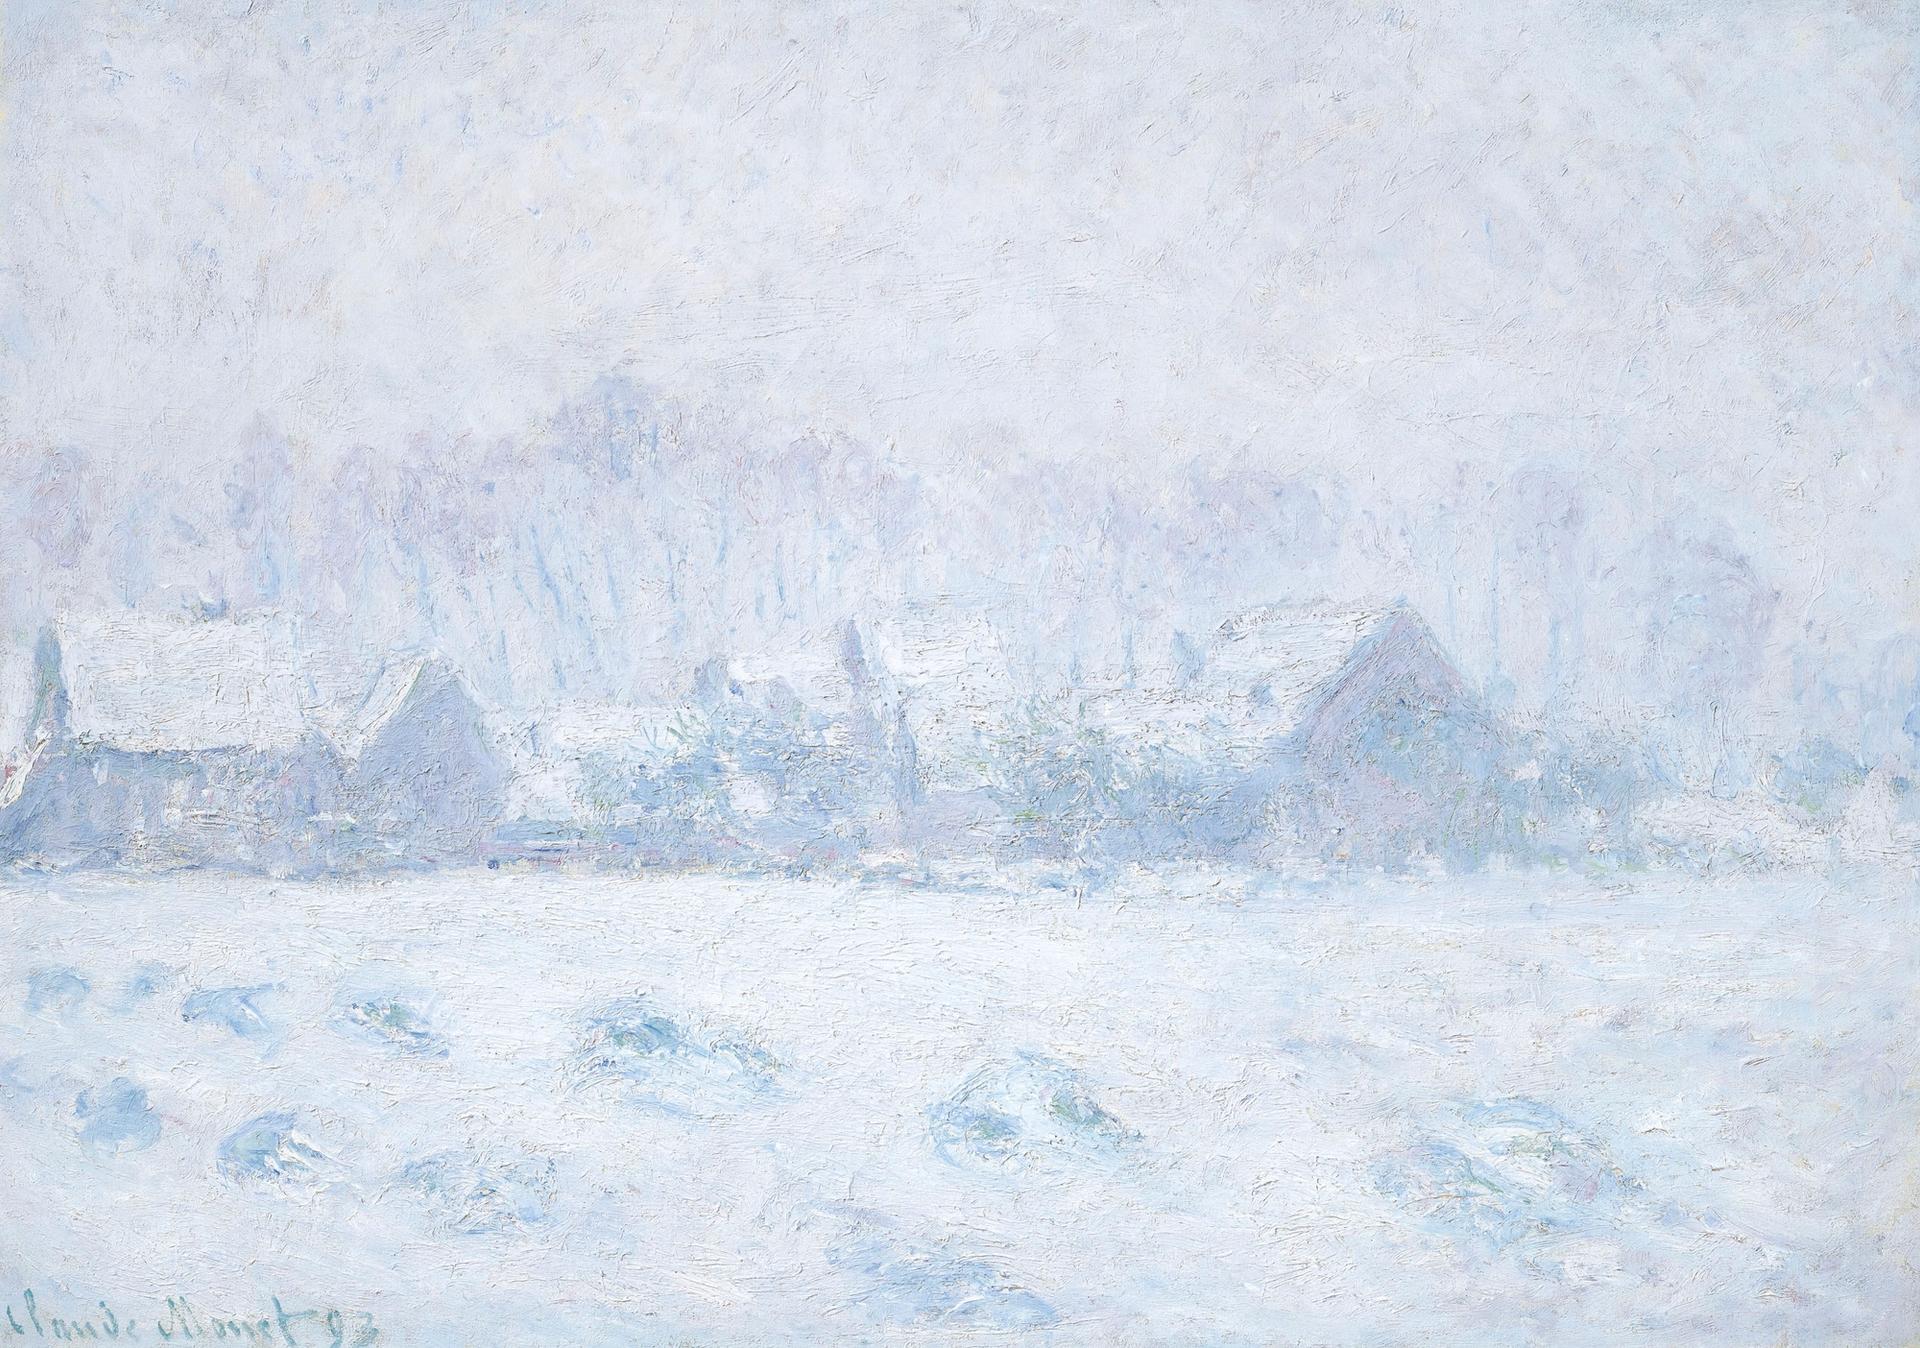 Monet's Effet de neige à Giverny (1893) sold for $13.5m ($15.5m with fees) Courtesy of Christie's